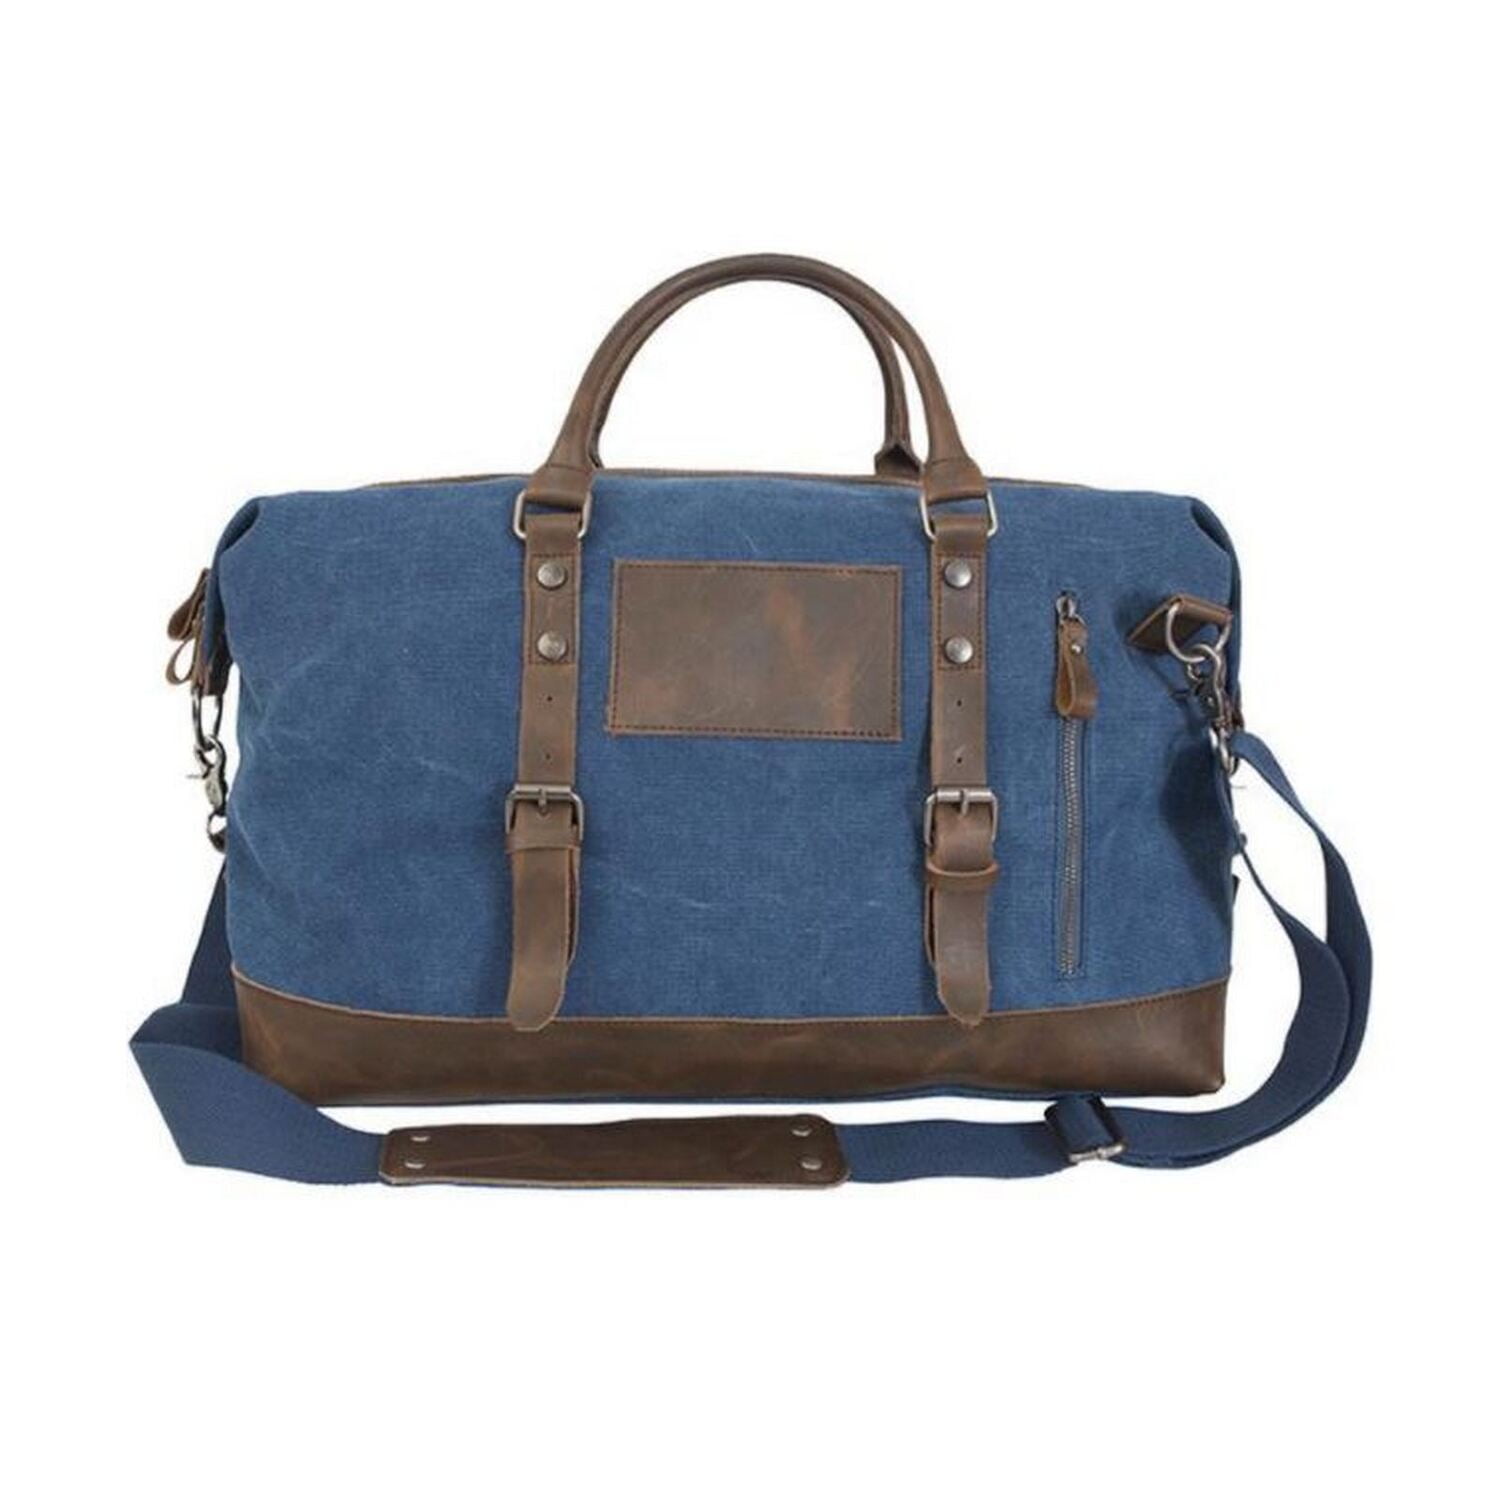 Canyon Outback Ryker 18-inch Canvas and Leather Duffel Bag - Walmart.com